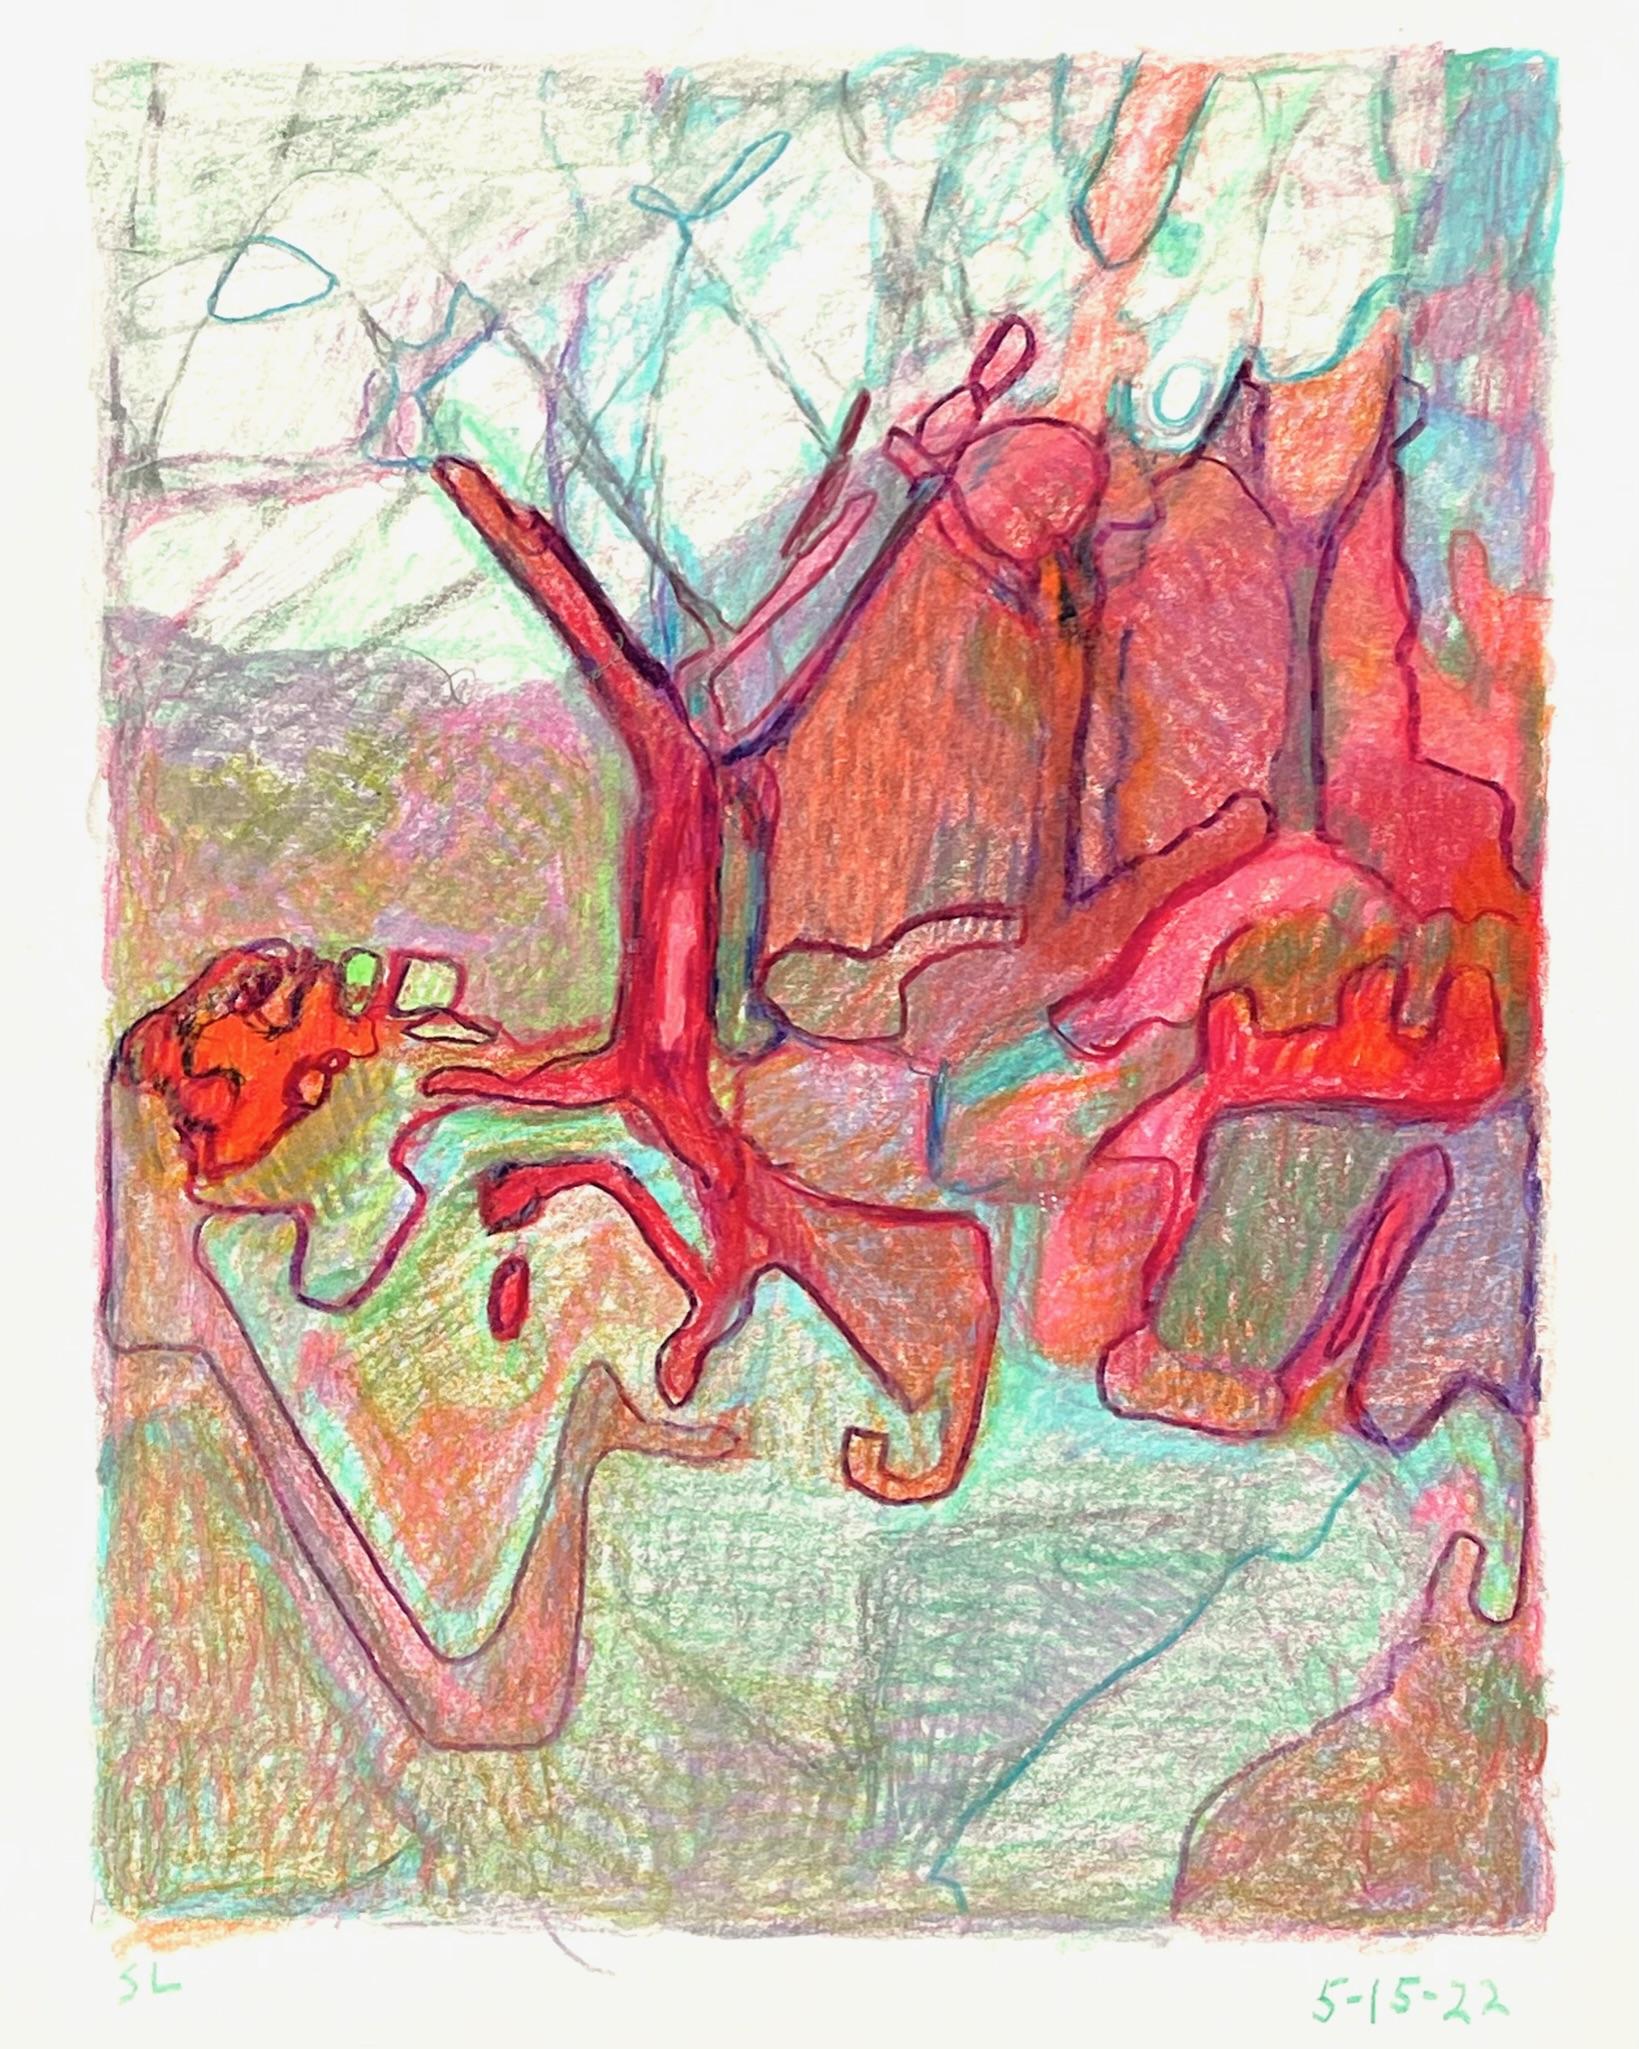 Sandy Litchfield Abstract Drawing - 5-15-22, Impressionist, abstracted landscape drawing with colored pencil